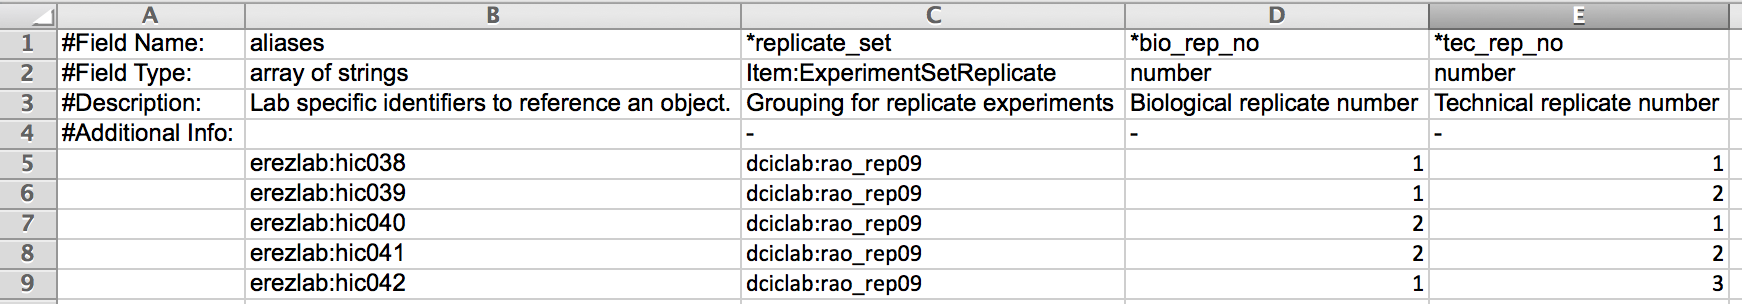 Experiments with replicate info example